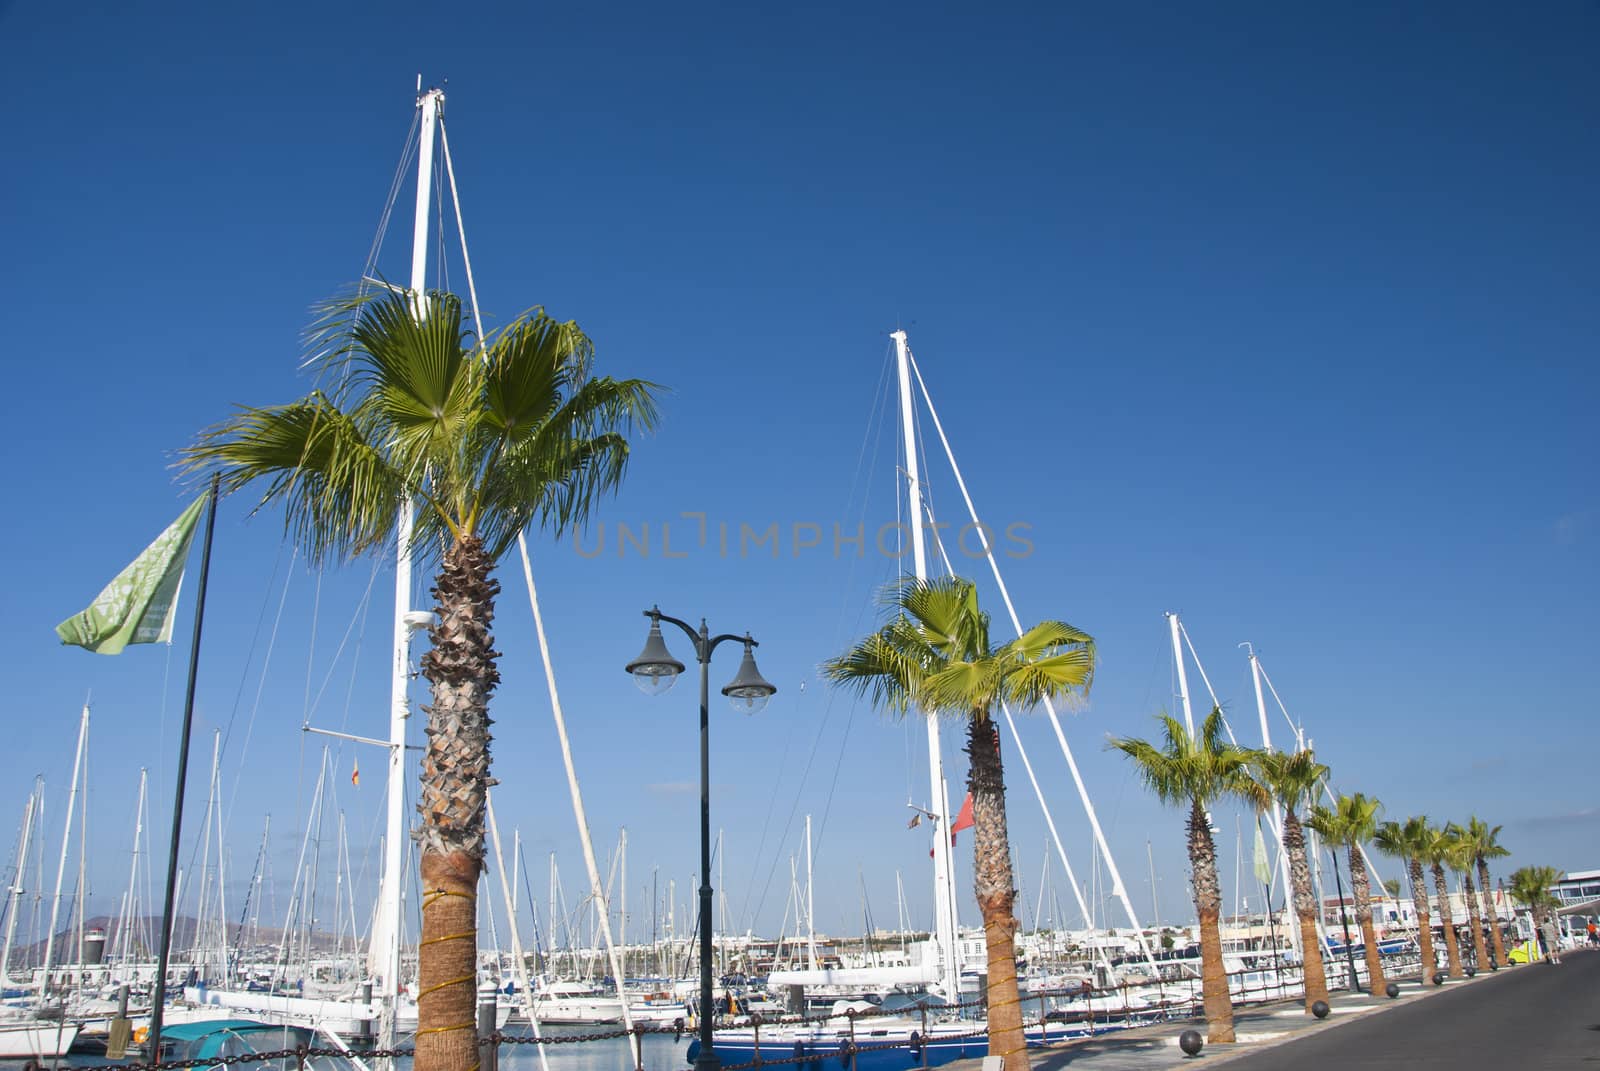 Palm Trees and Masts by d40xboy